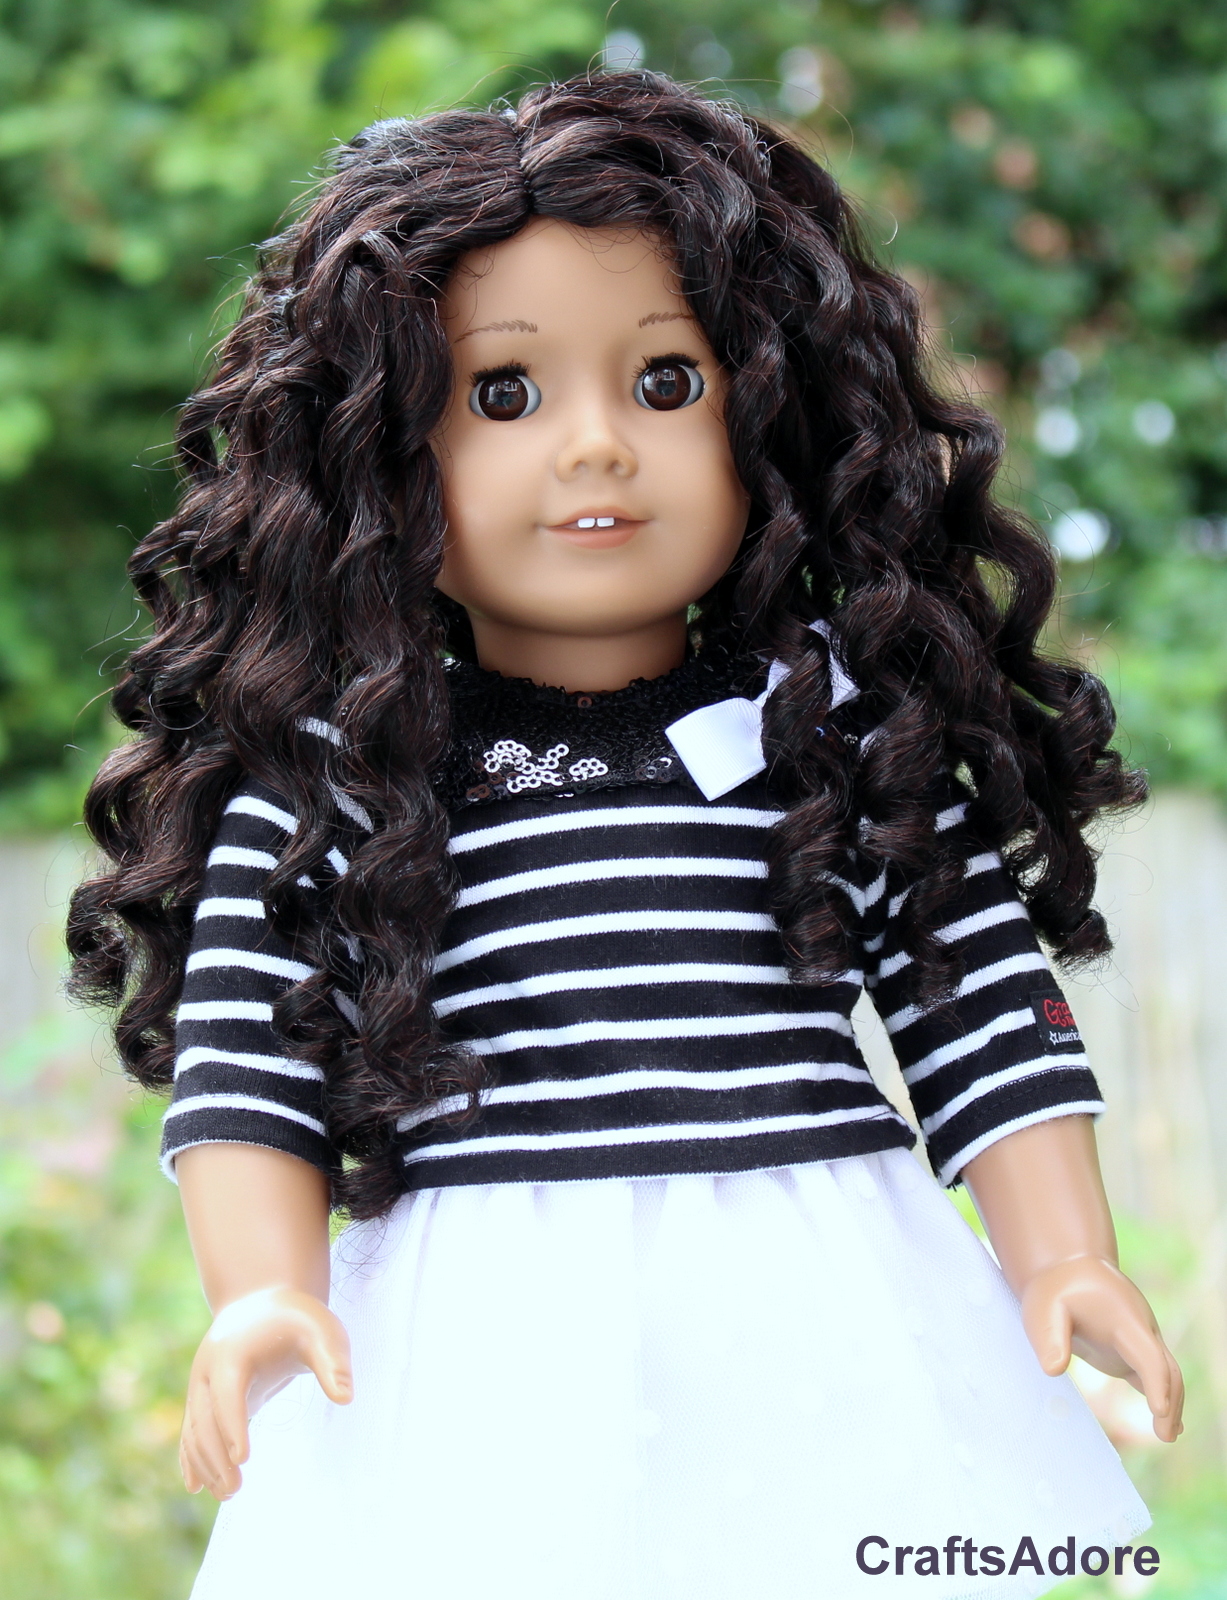 Craftsadore Custom American Girl Doll Number 44 ~ Michelle